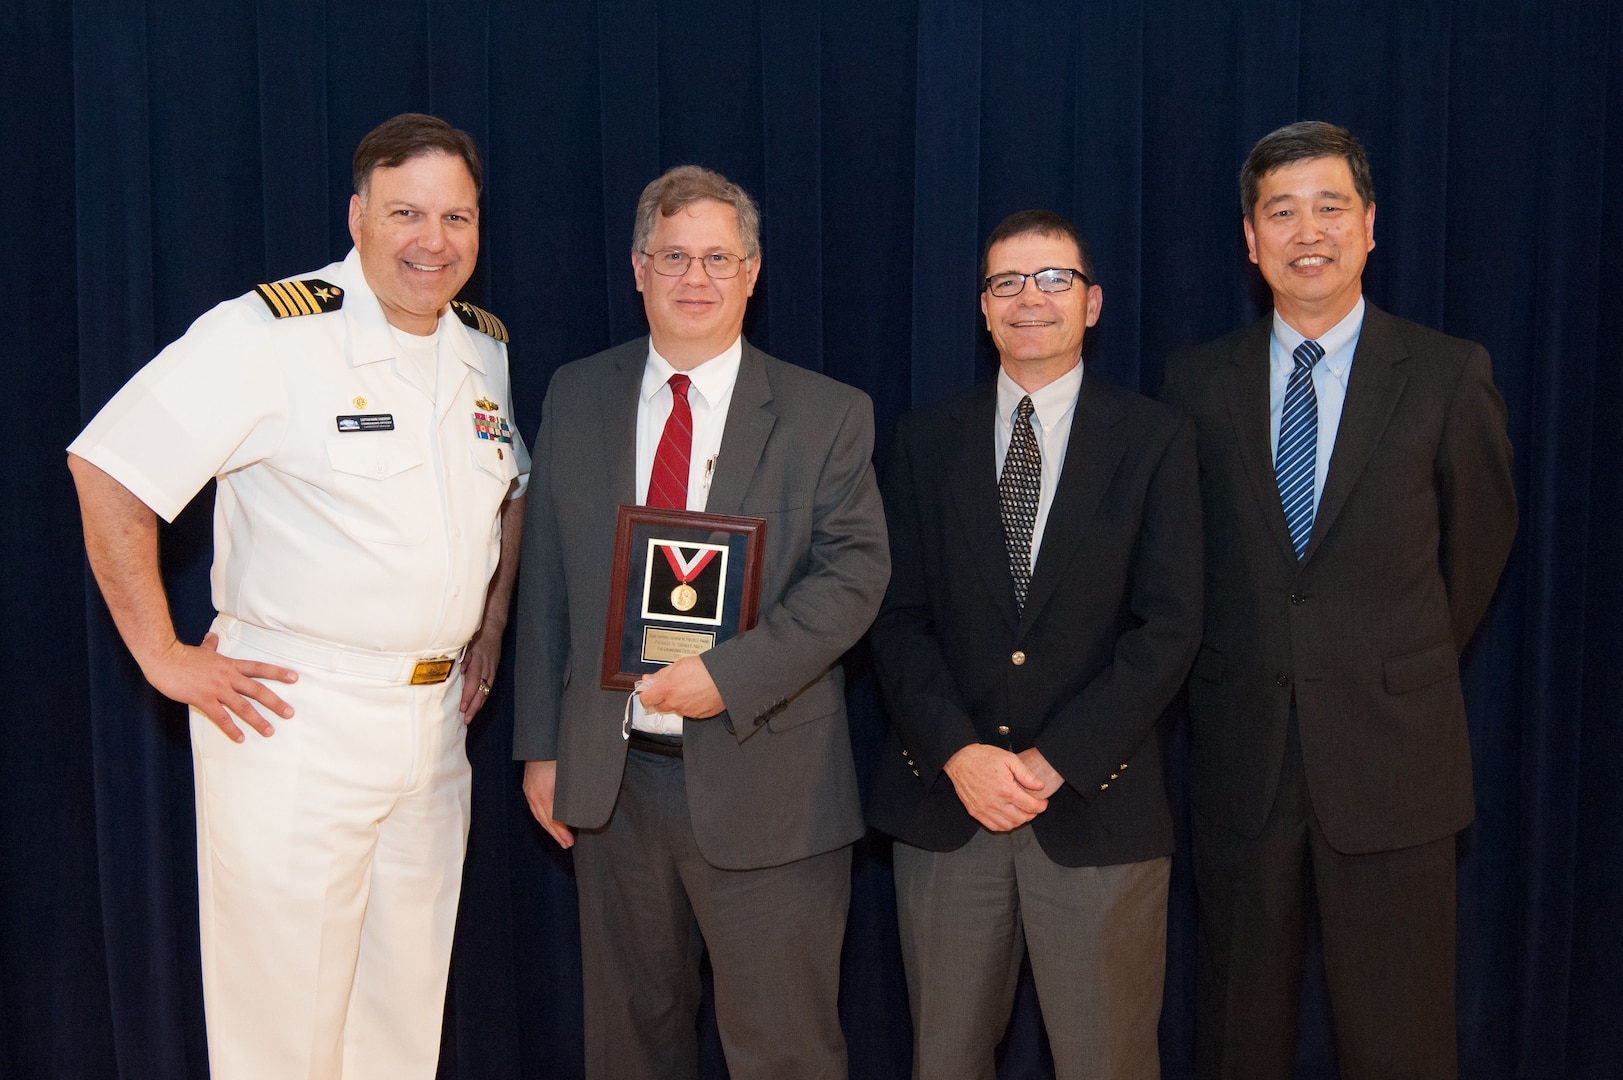 Stephen Neely, a naval architect in Carderock's Computational Propulsors Branch, receives the Rear Adm. George W. Melville Award for engineering excellence at the Naval Surface Warfare Center, Carderock Division Honor Awards ceremony Aug. 28, 2018, in West Bethesda, Md. From left to right: Commanding Officer Capt. Mark Vandroff; Scott Black, accepting on Neely™s behalf; Steve Ouimette, deputy head of the Naval Architecture and Engineering Department; and Dr. Paul Shang, acting technical director. (U.S. Navy photo by Nicholas Brezzell/Released)